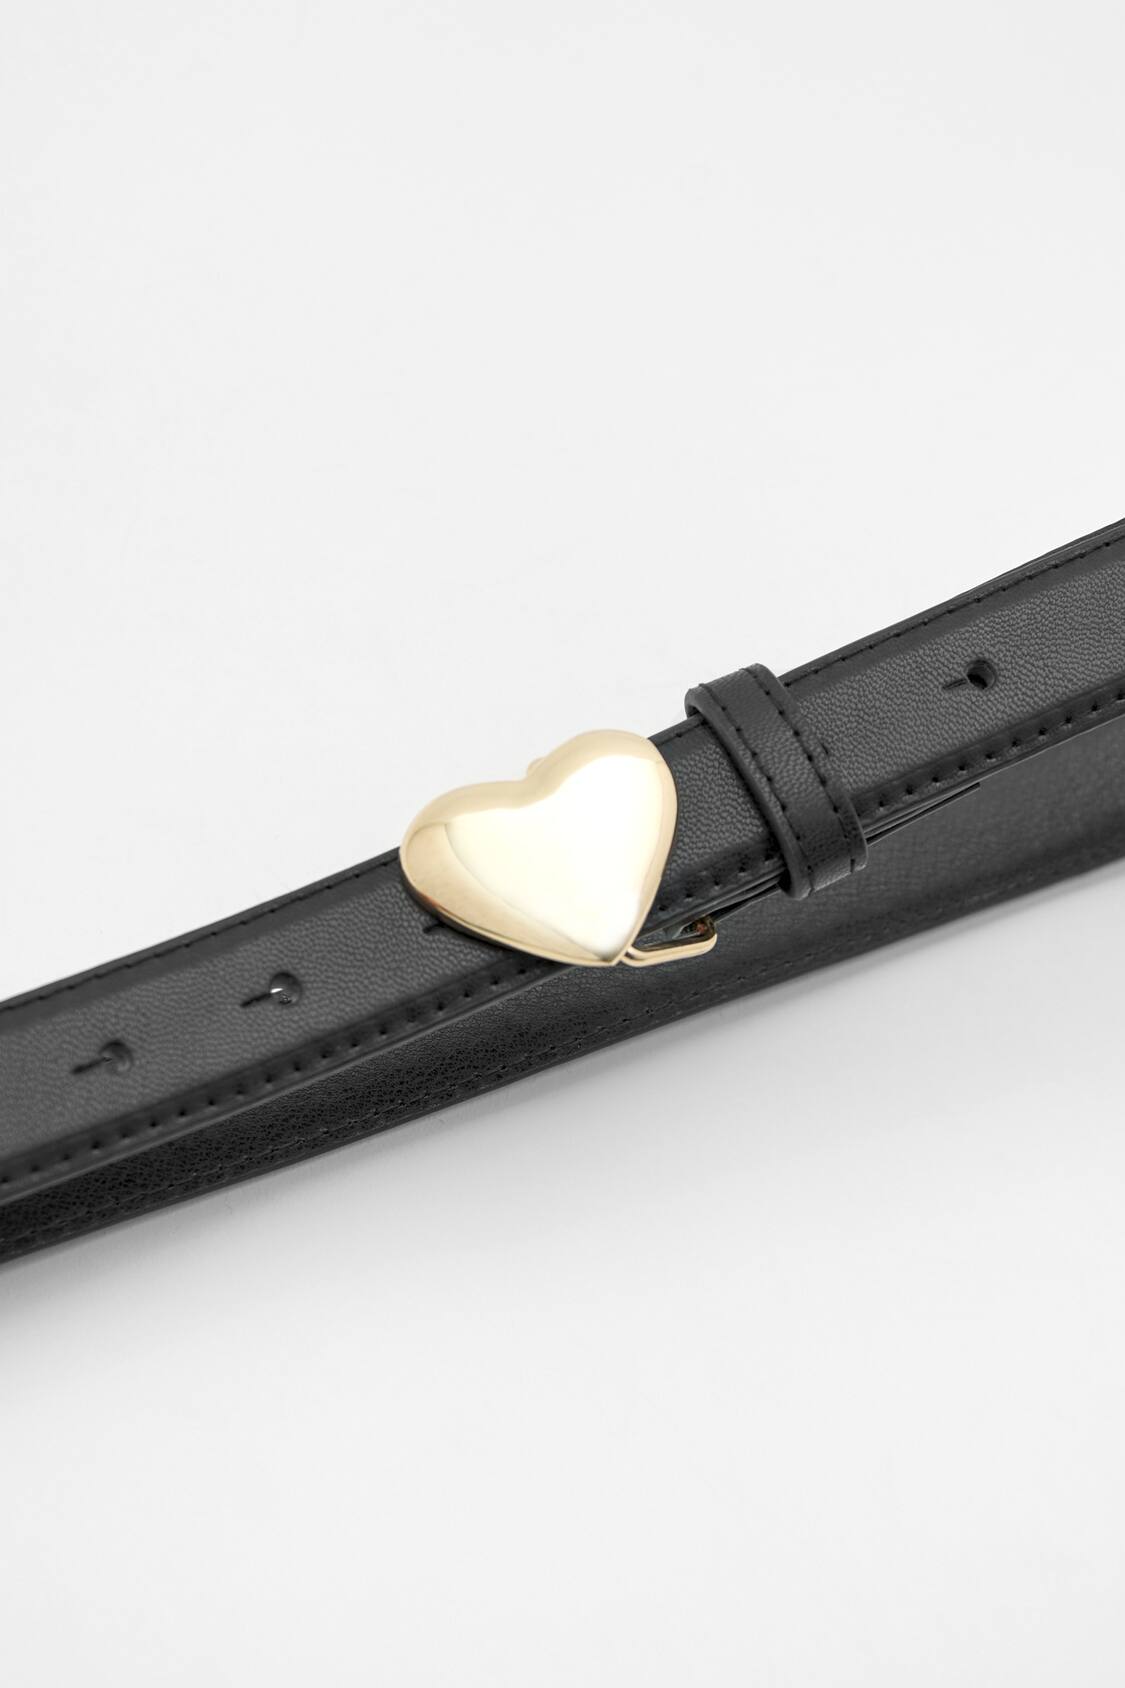 Faux leather belt with heart buckle - pull&bear